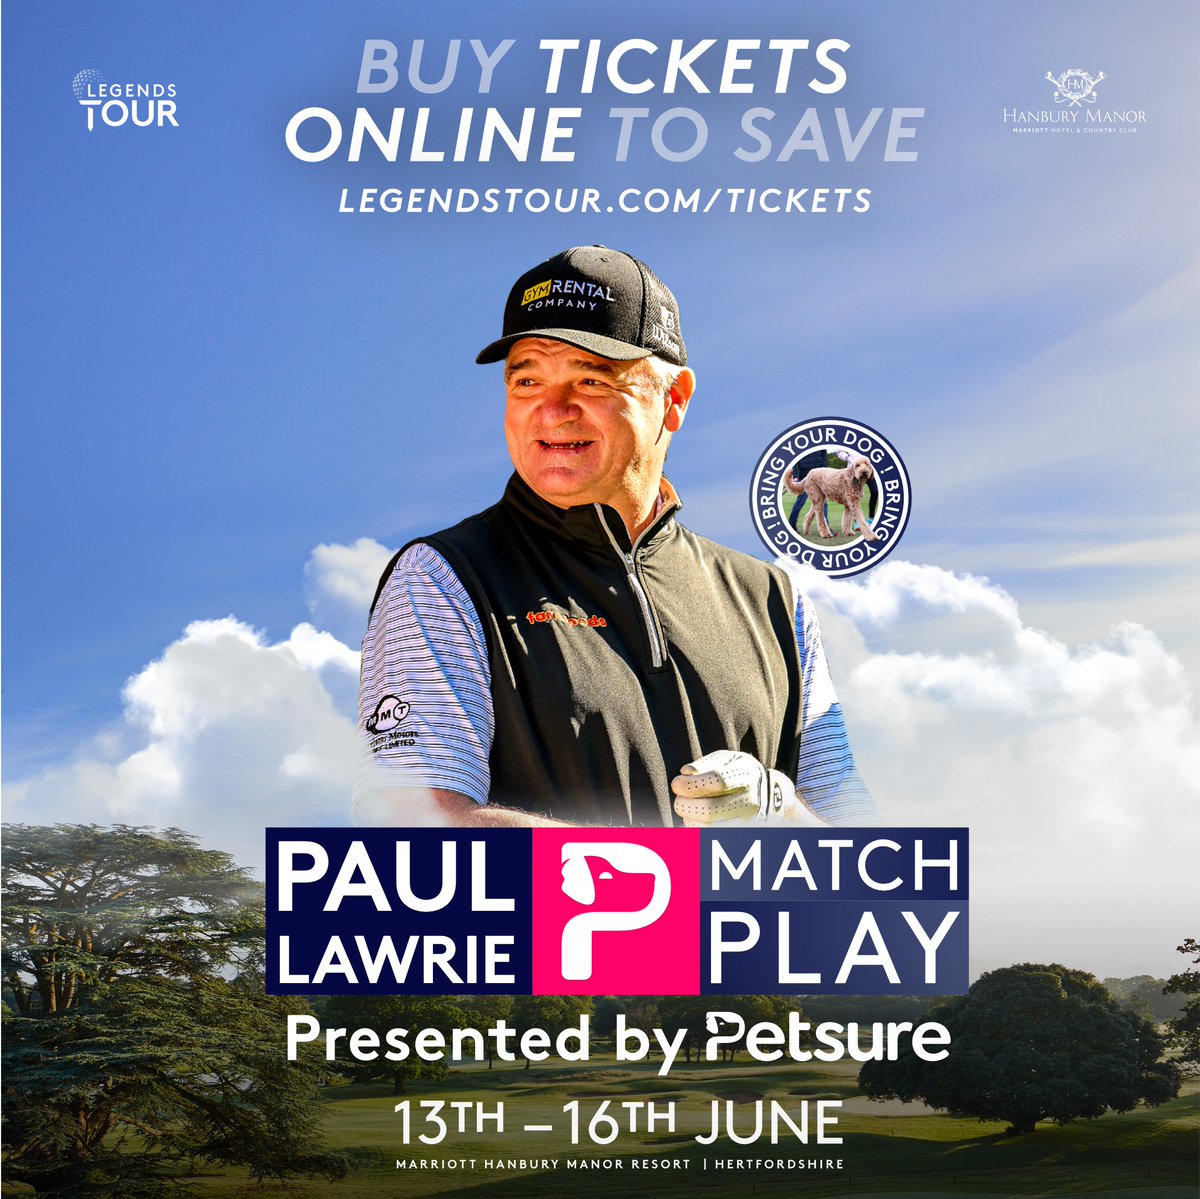 See the Legends in England this June! Buy tickets online now to save ow.ly/seZg50RAzP0 Matchplay knockout - it going to be fun! #PLMP #euLegendsTour @PaulLawriegolf